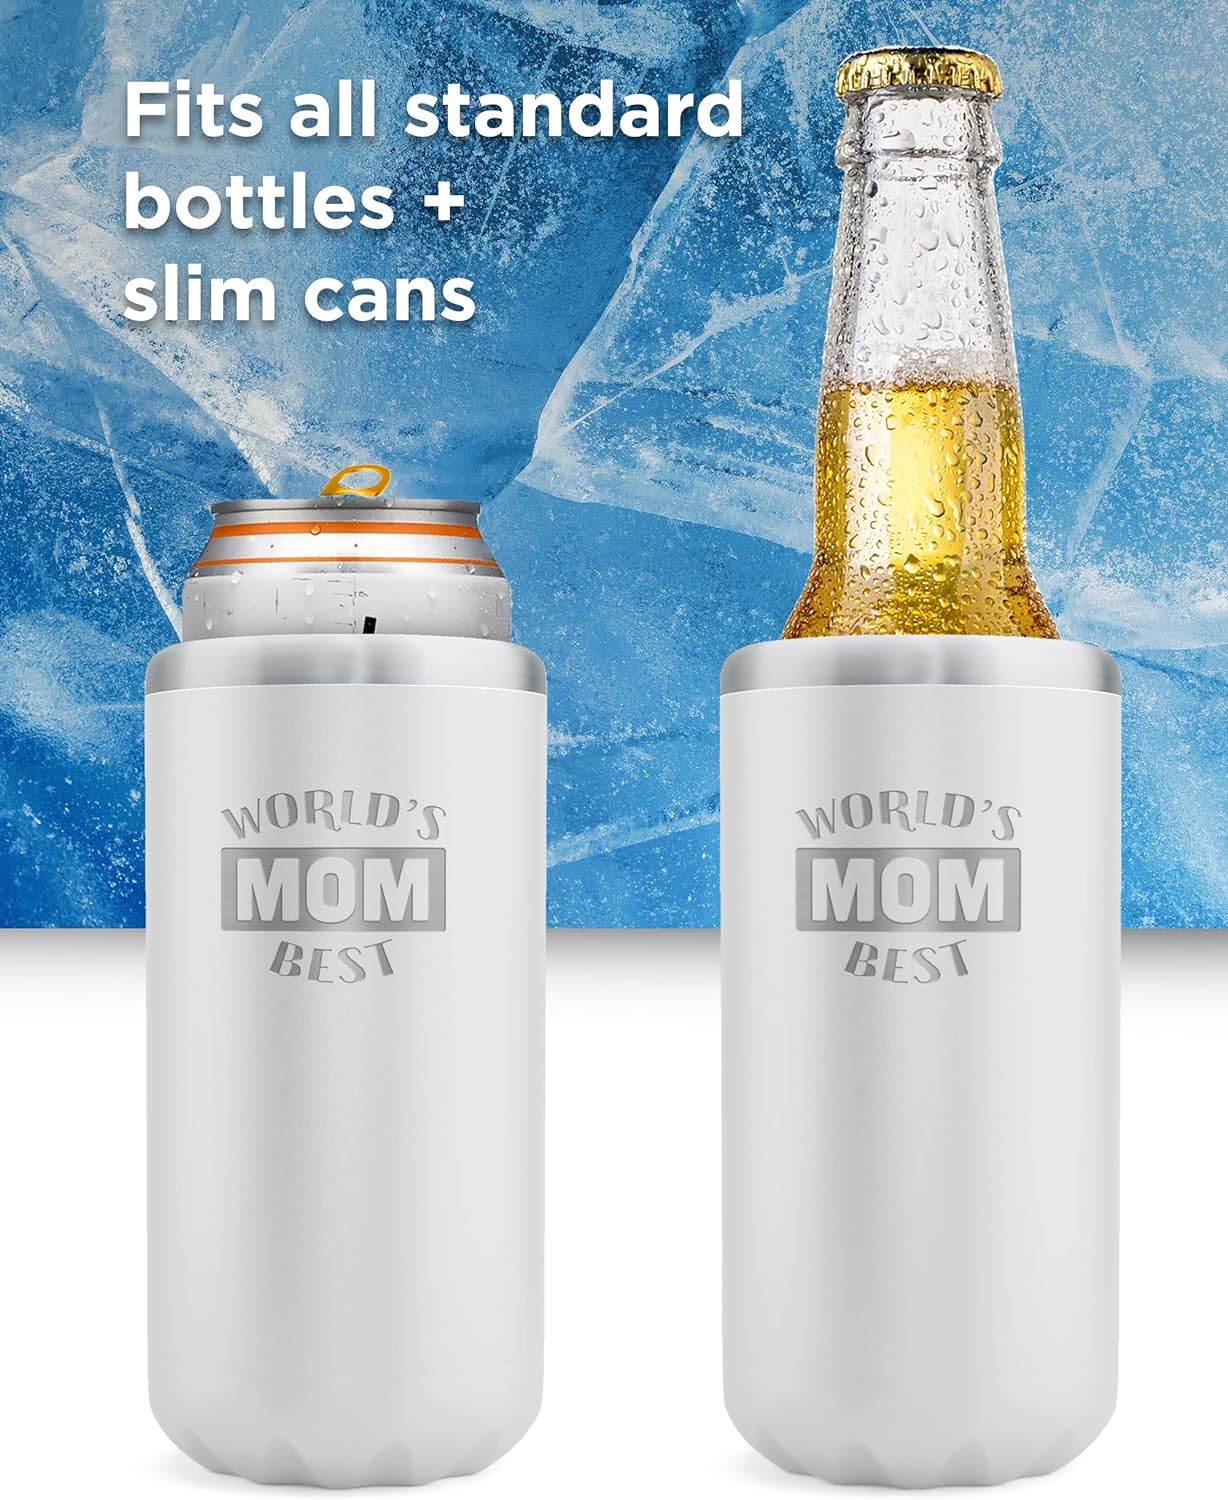 Insulated Holders for Skinny Beer or Cold Hard Seltzer - Gift Idea for Anniversary or Christmas